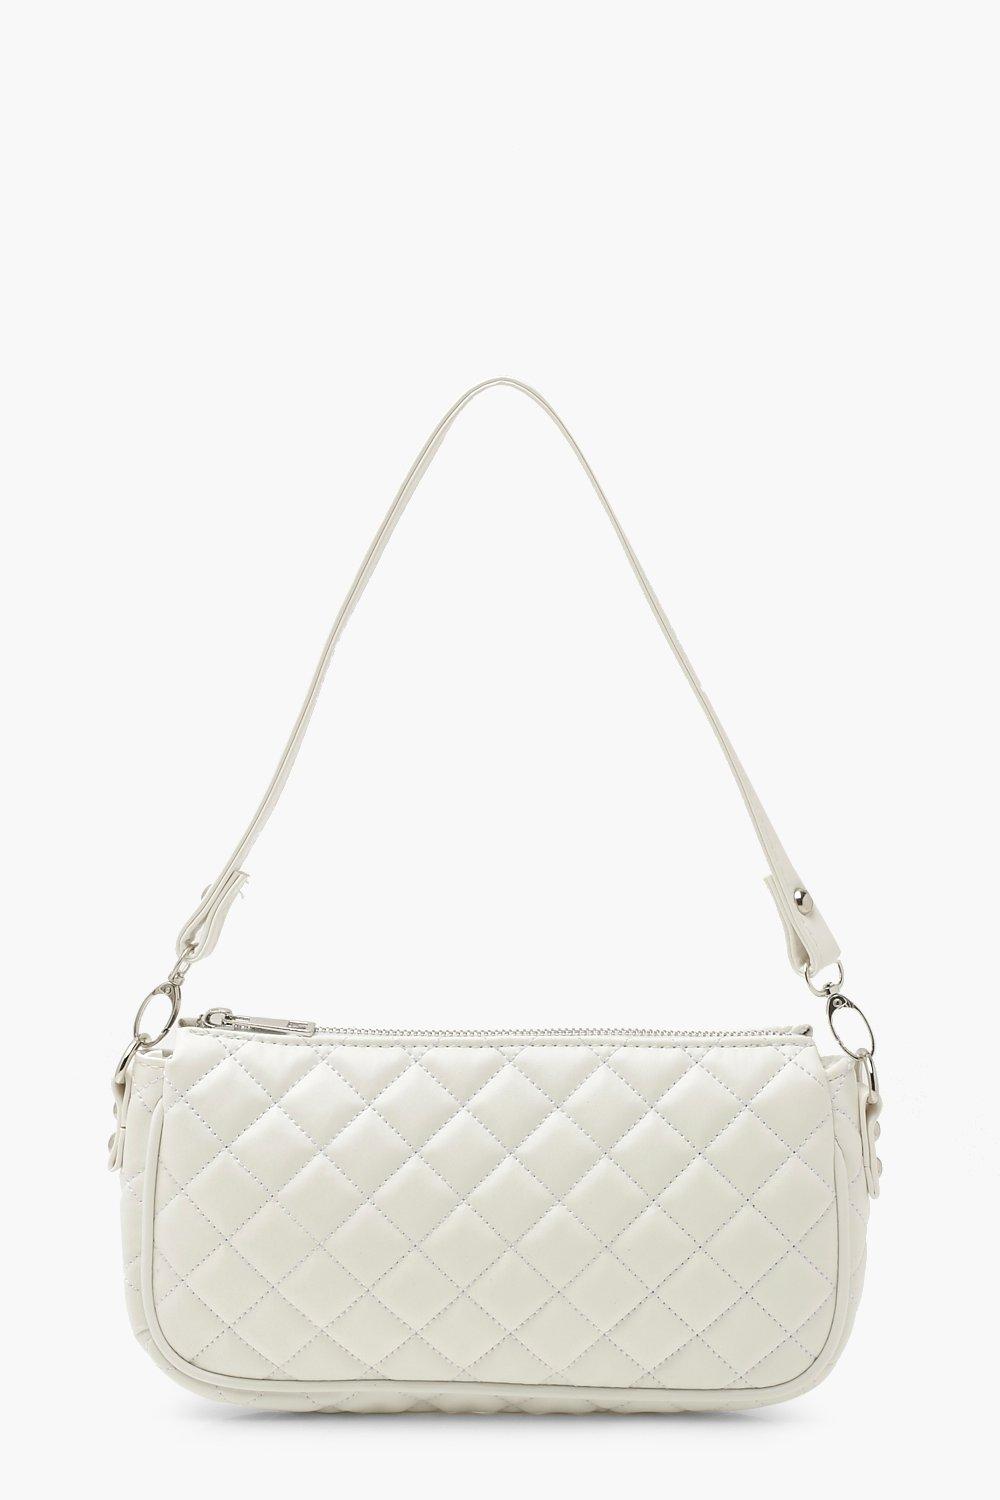 ACCESSORIES Diamond Quilted PU Under Arm Bag  